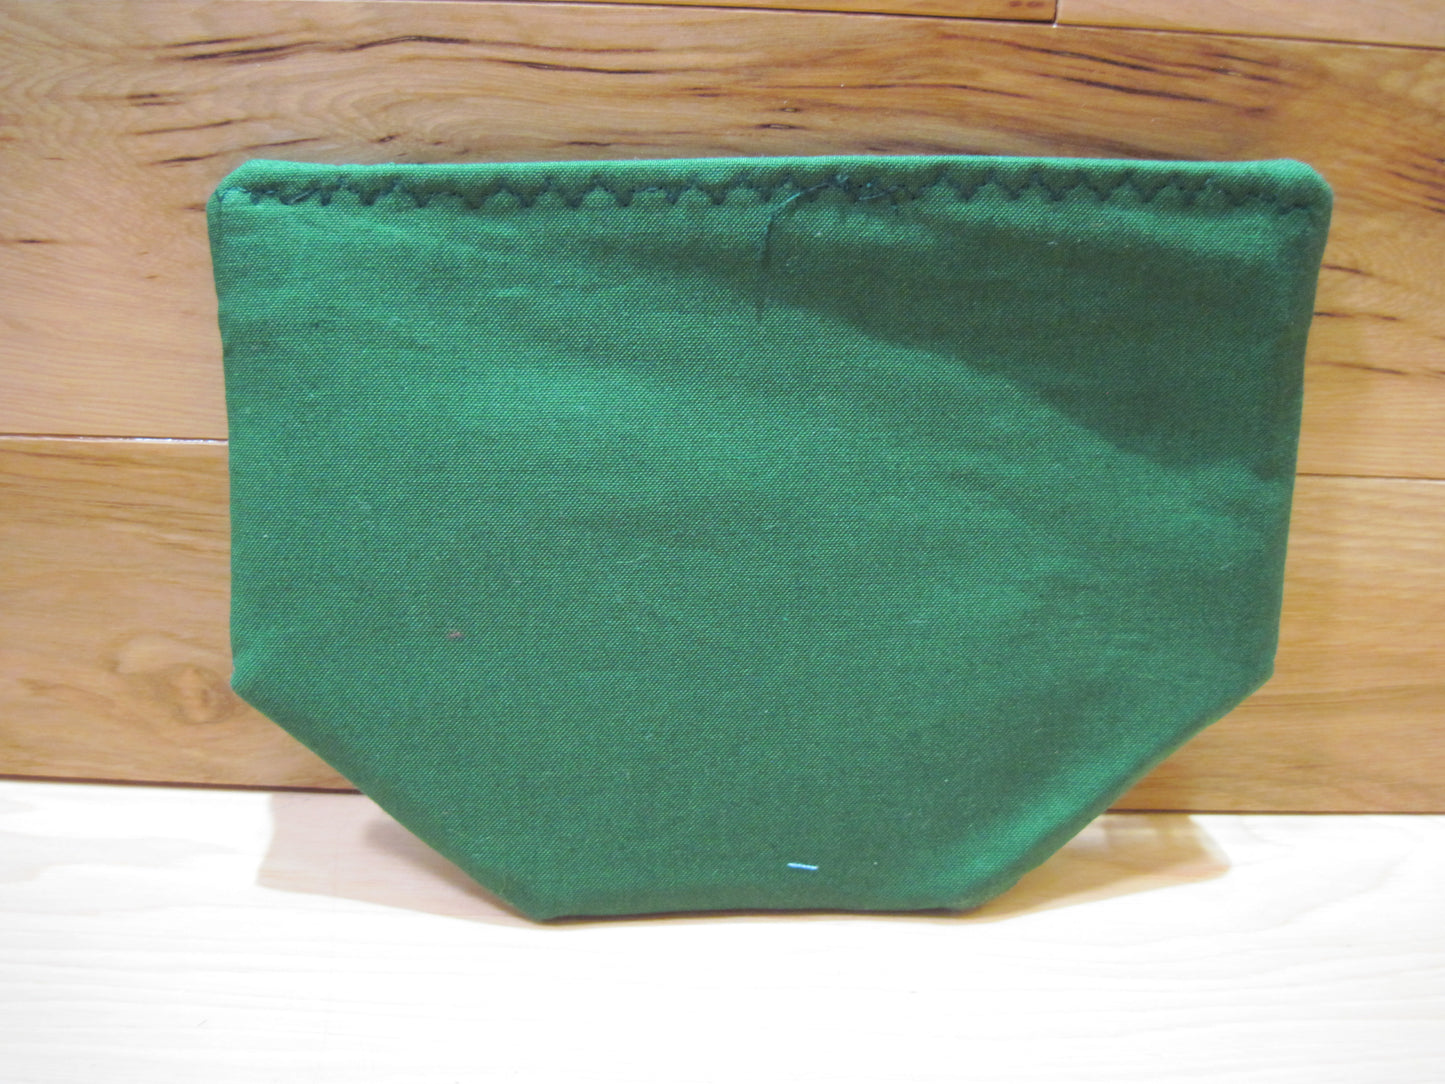 Notions Bag Slytherin House w/ green zipper